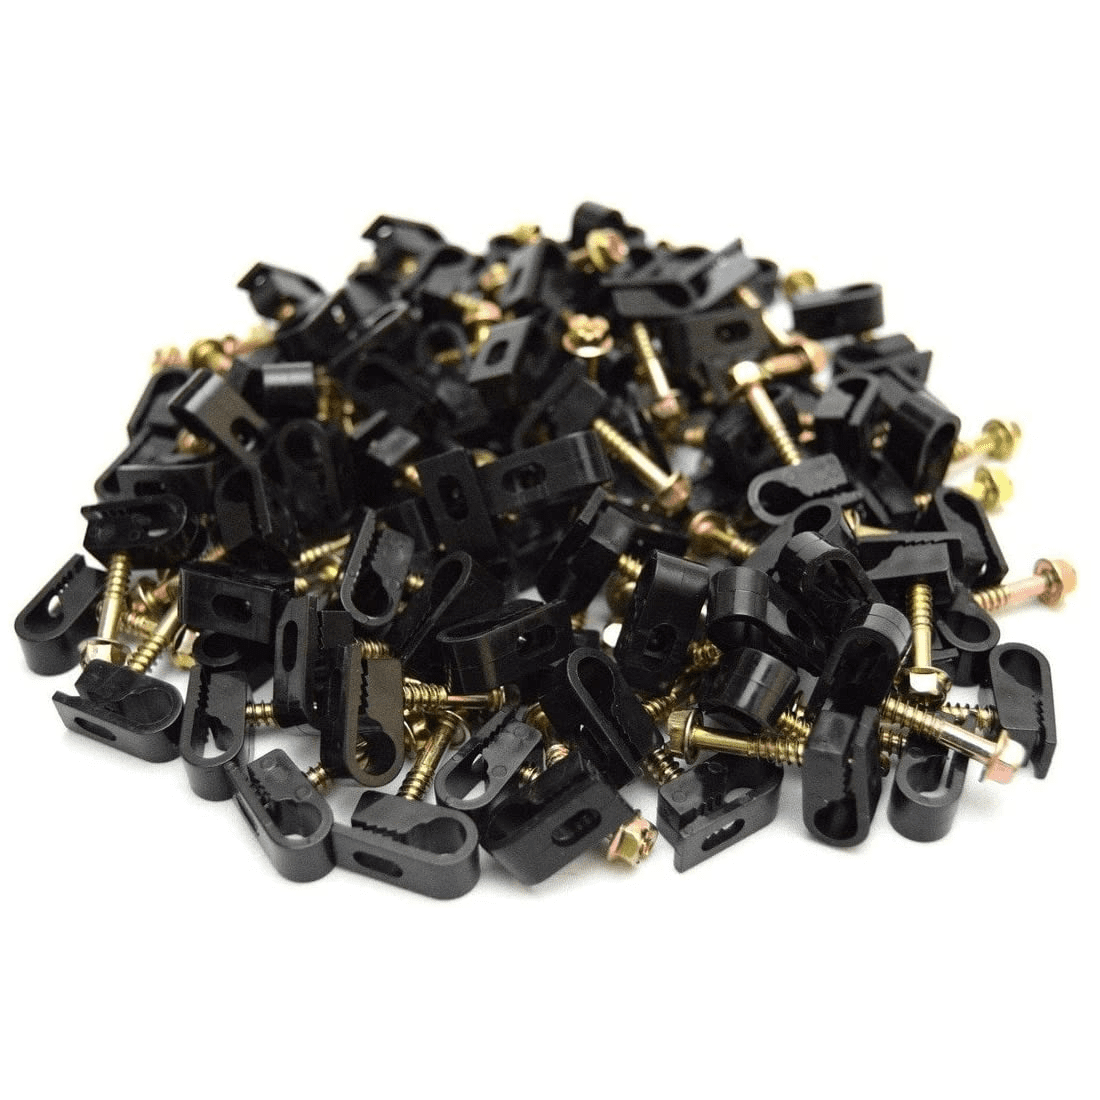 Steren Grip Clip Dual Cable Clips Bag of 100 Pack Ct 200-964BK Black 